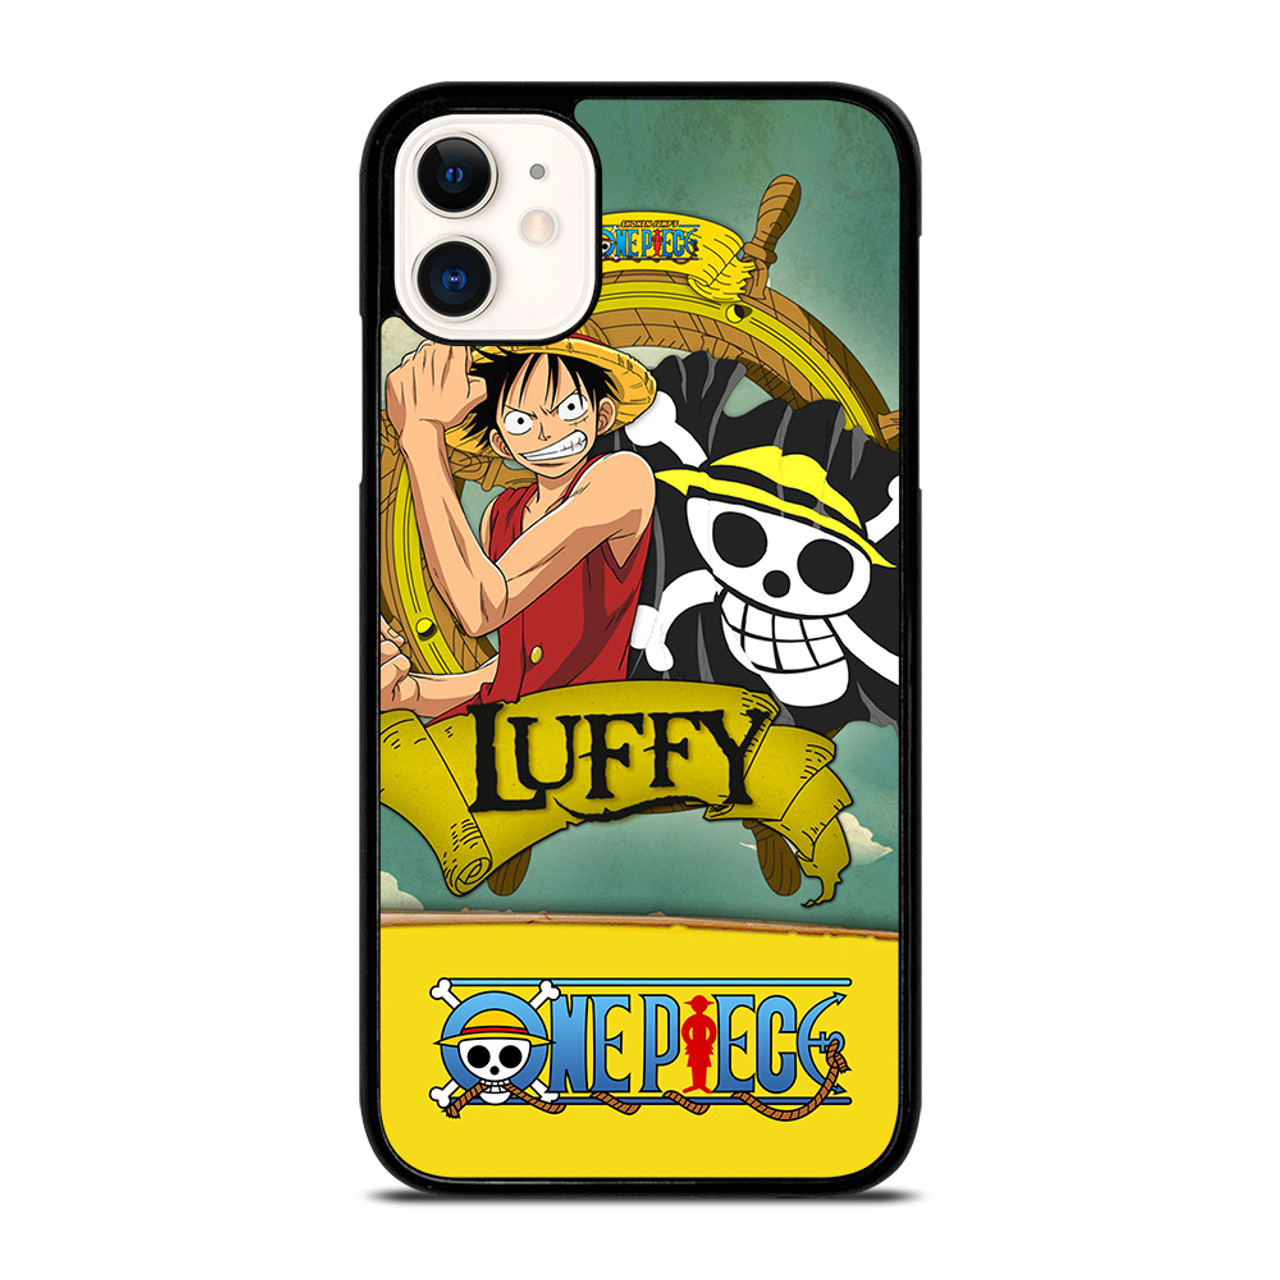 LUFFY ONE PIECE iPhone 11 Case Cover